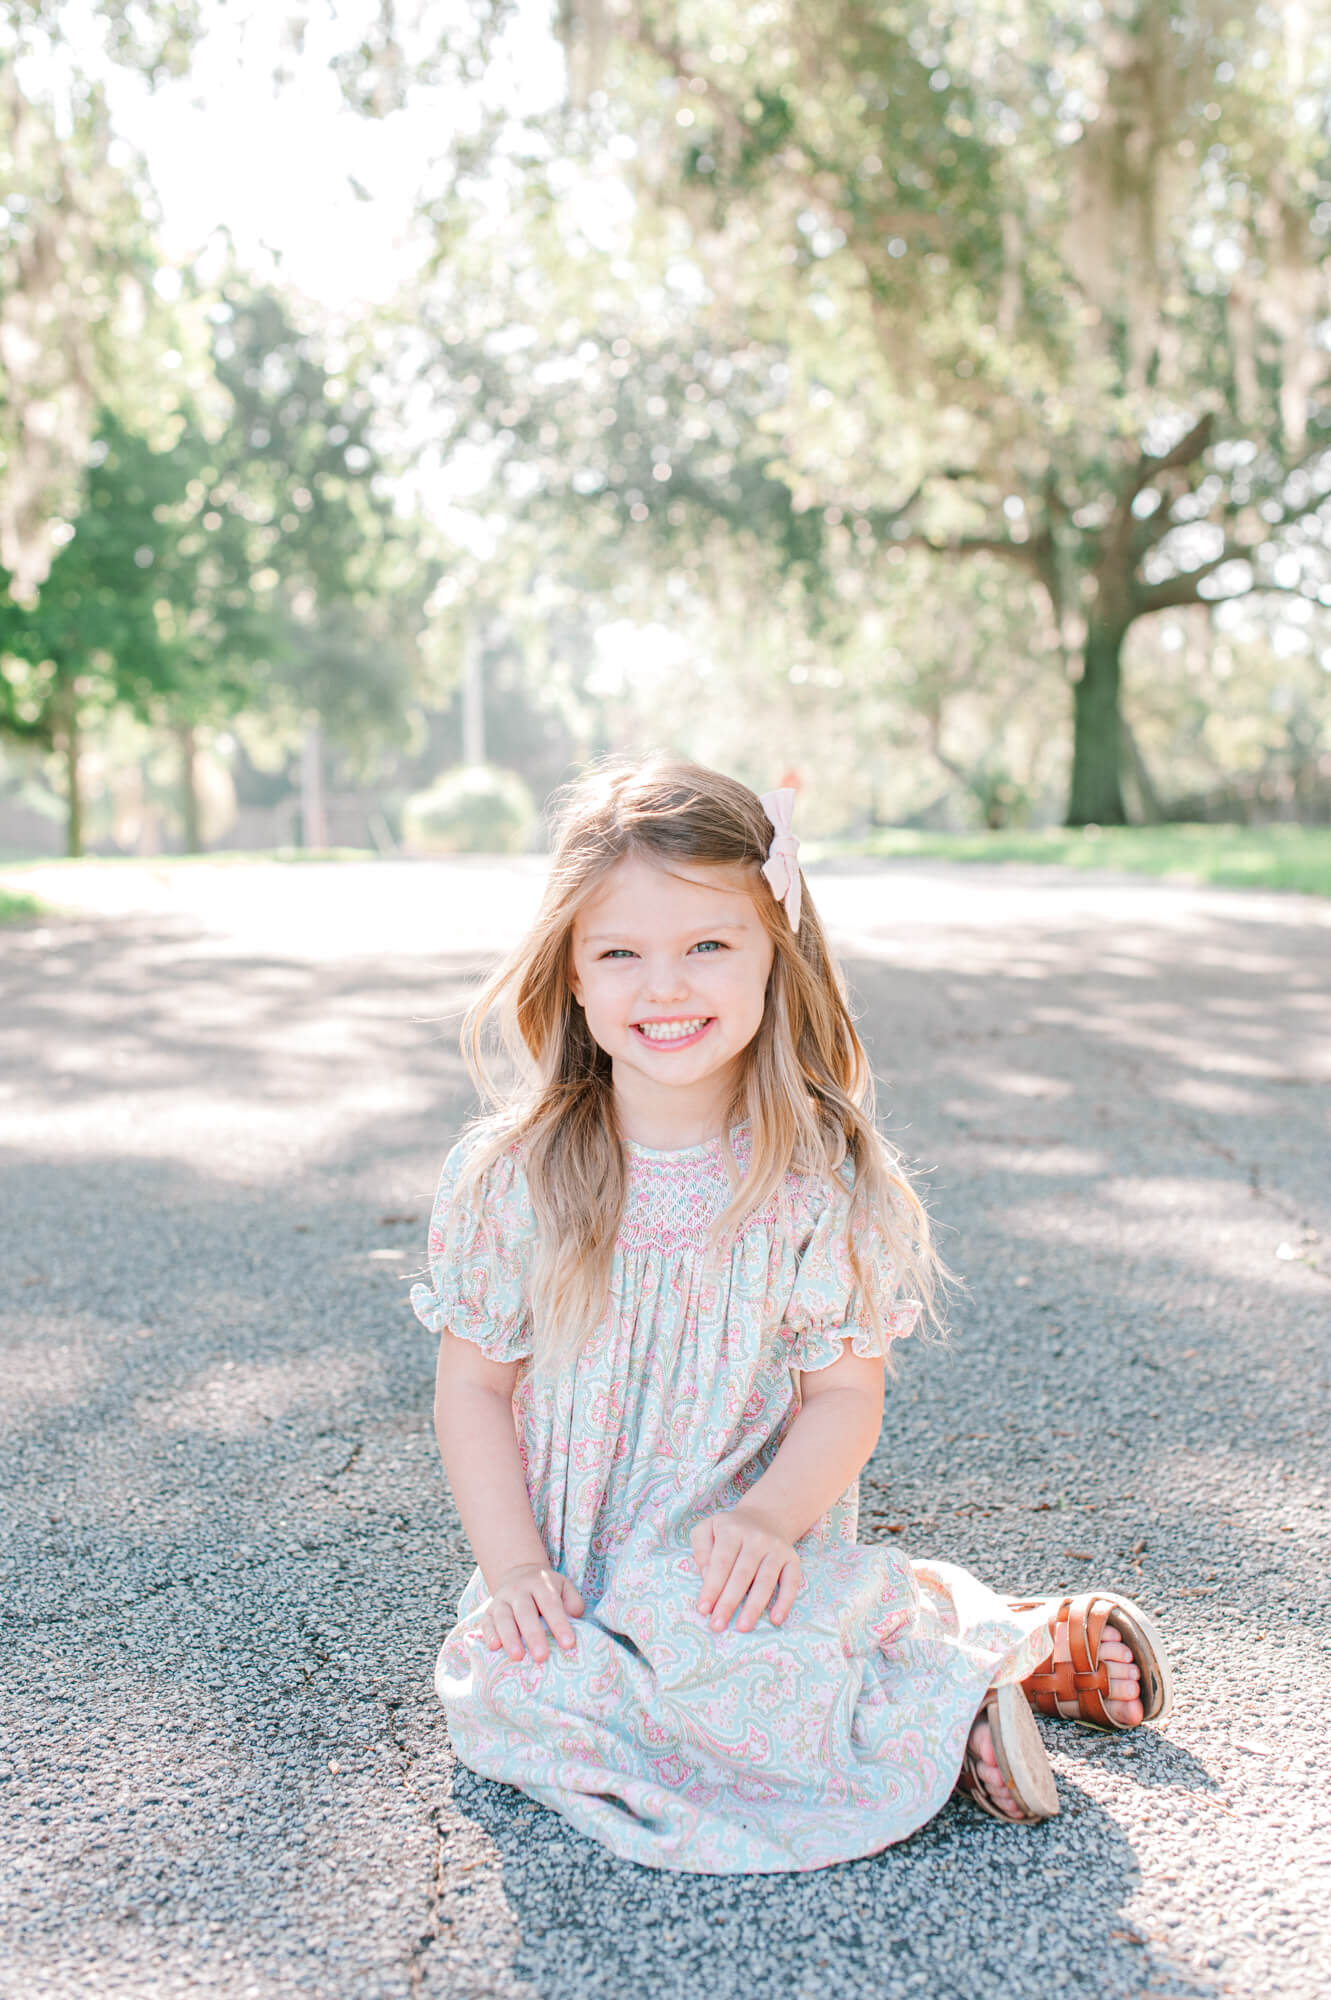 Portrait of a young girl in a floral dress smiling at the camera near a park baby wheels orlando